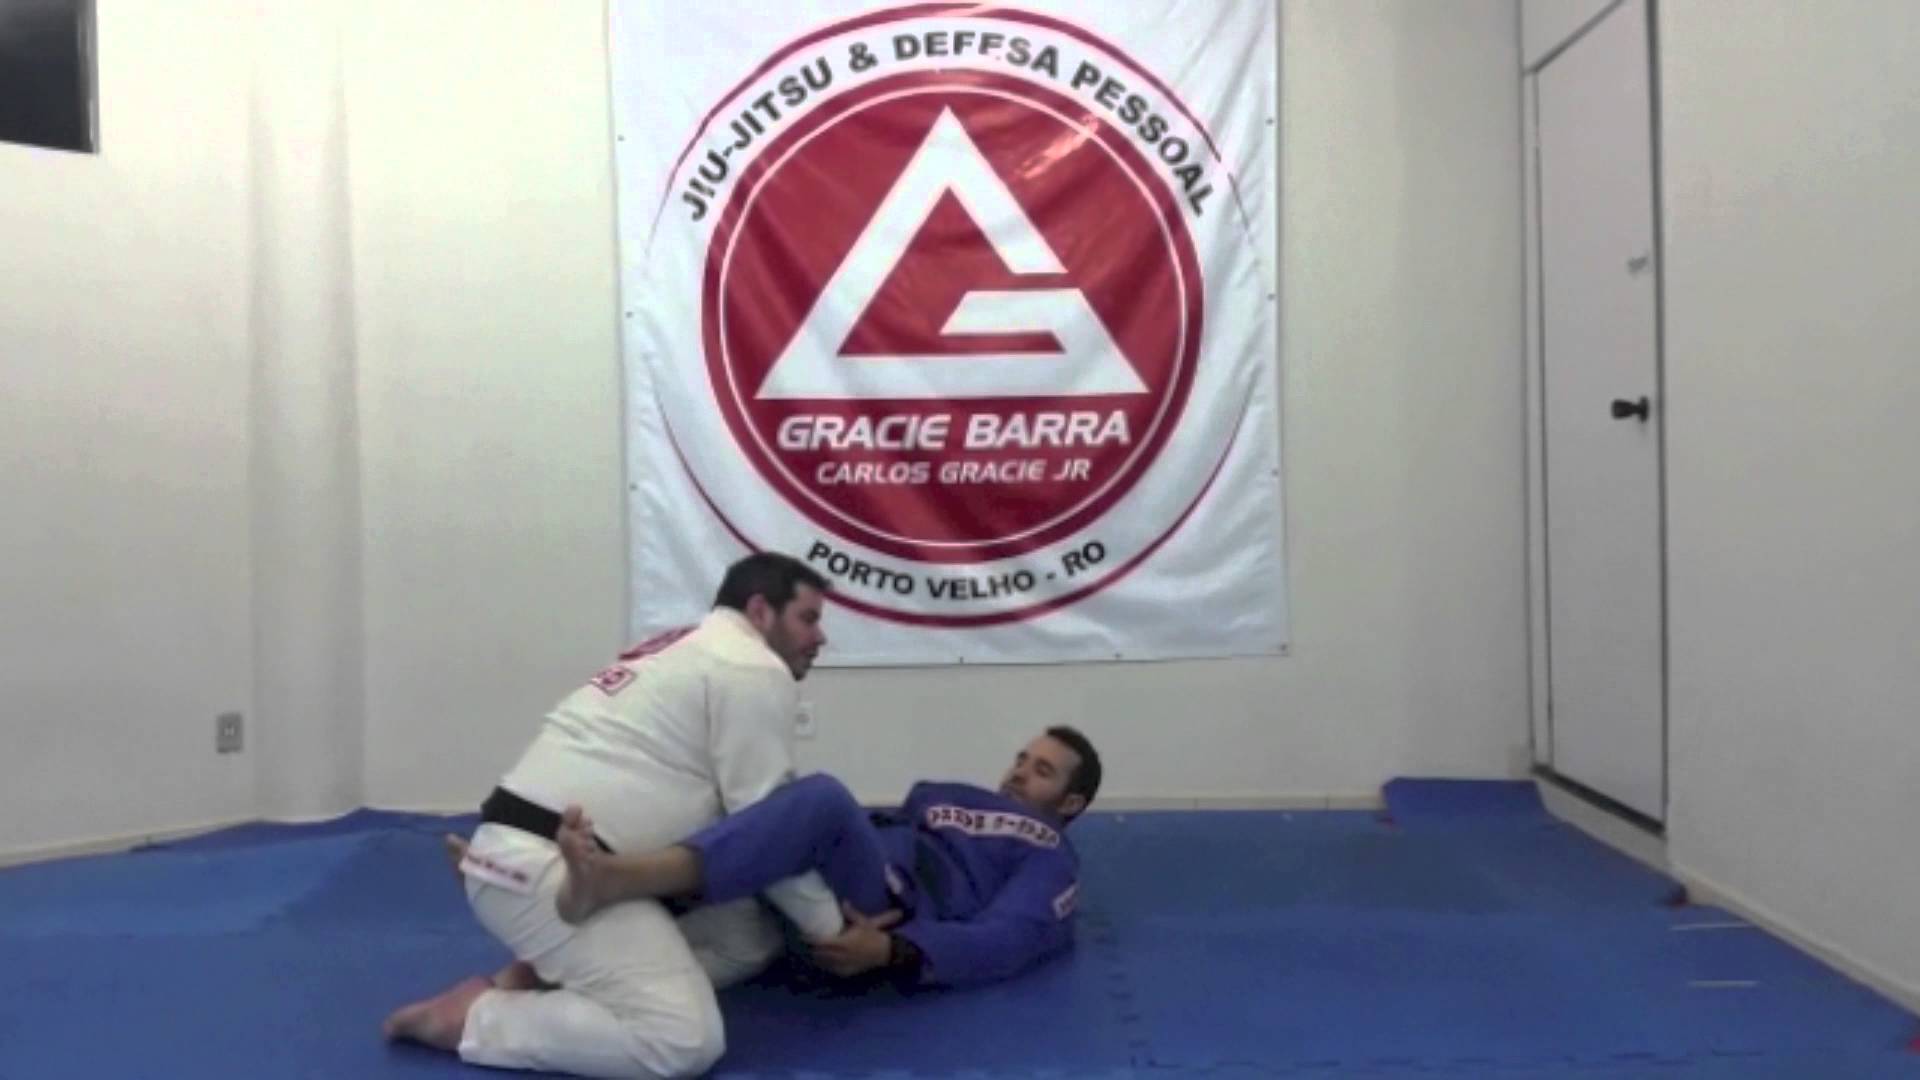 Double under pass + Submission